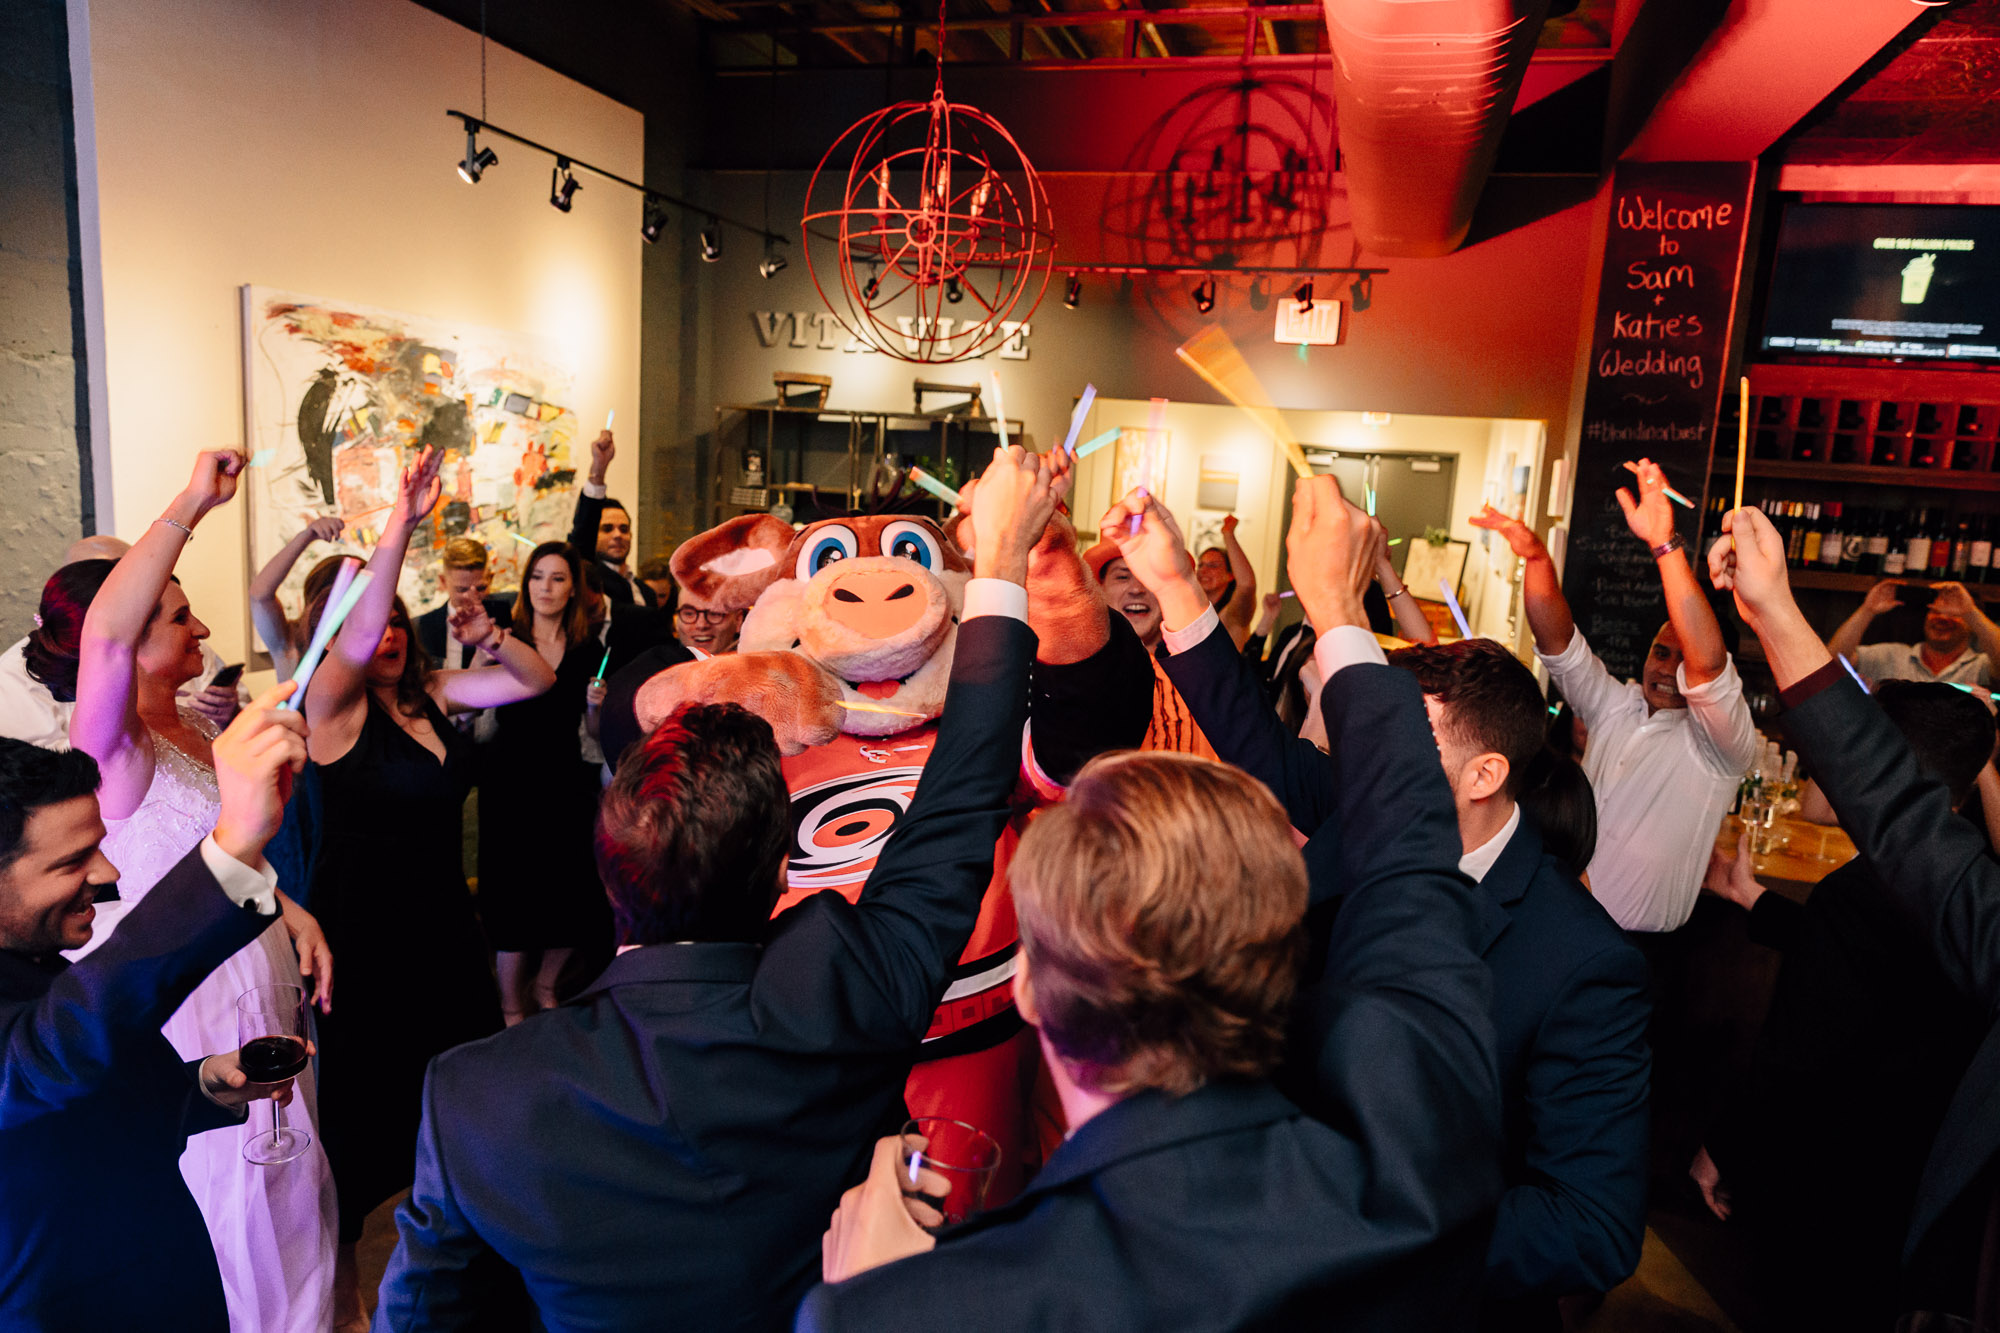 stormy hurricanes mascot makes an appearance at a wedding